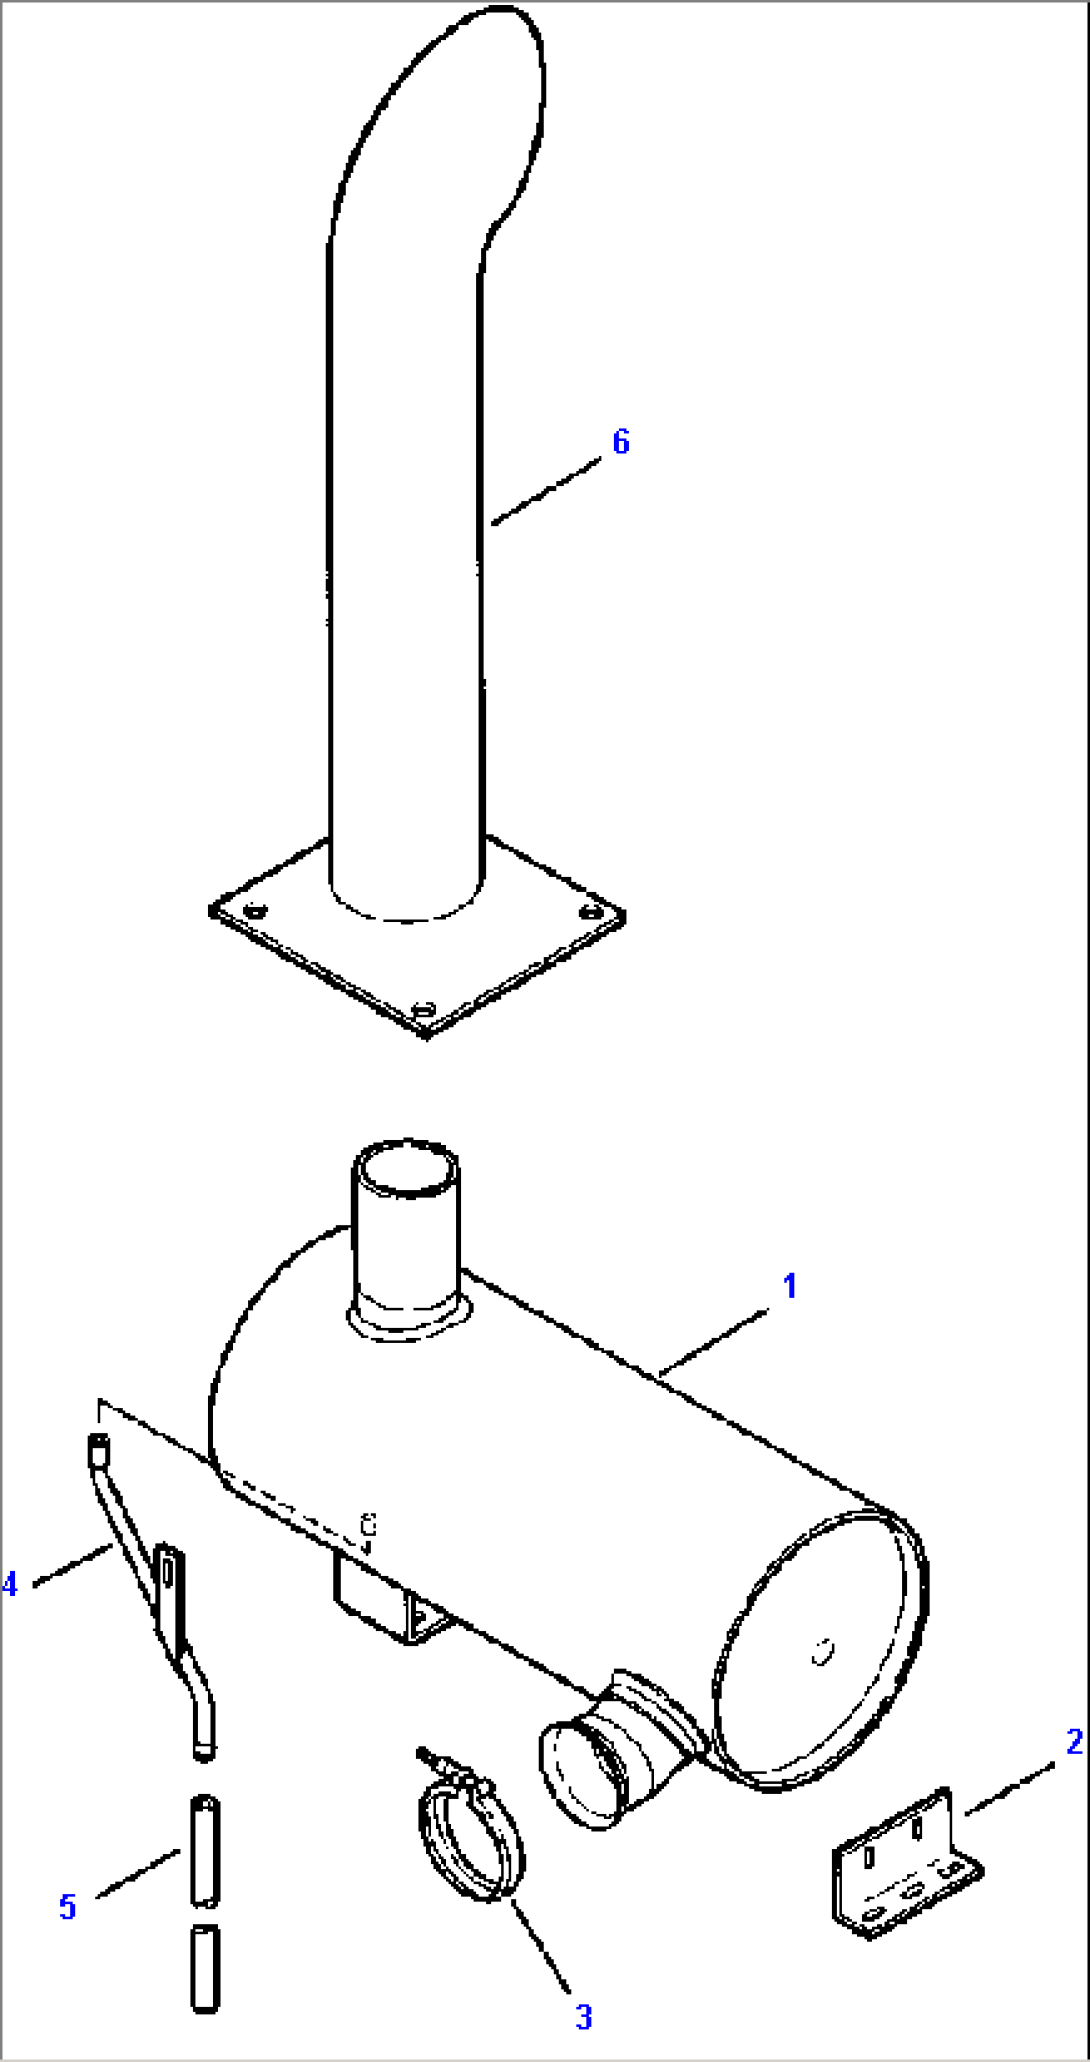 FIG NO. 1001D EXHAUST MUFFLER AND CONNECTIONS